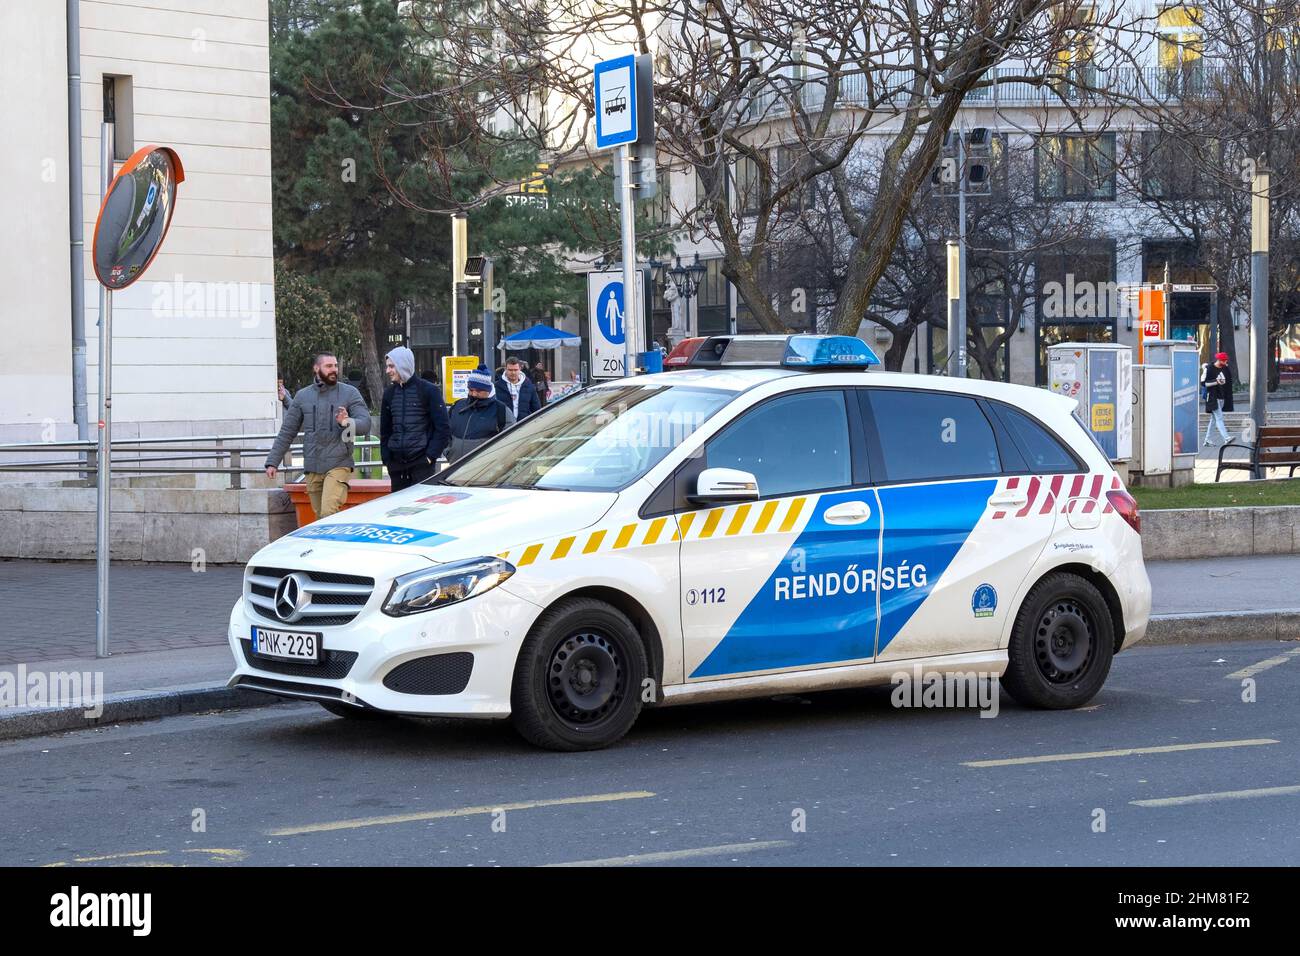 BUDAPEST - JAN 20: Hungarian police car Rendorseg in a street of Budapest, January 20. 2021 in Hungary Stock Photo